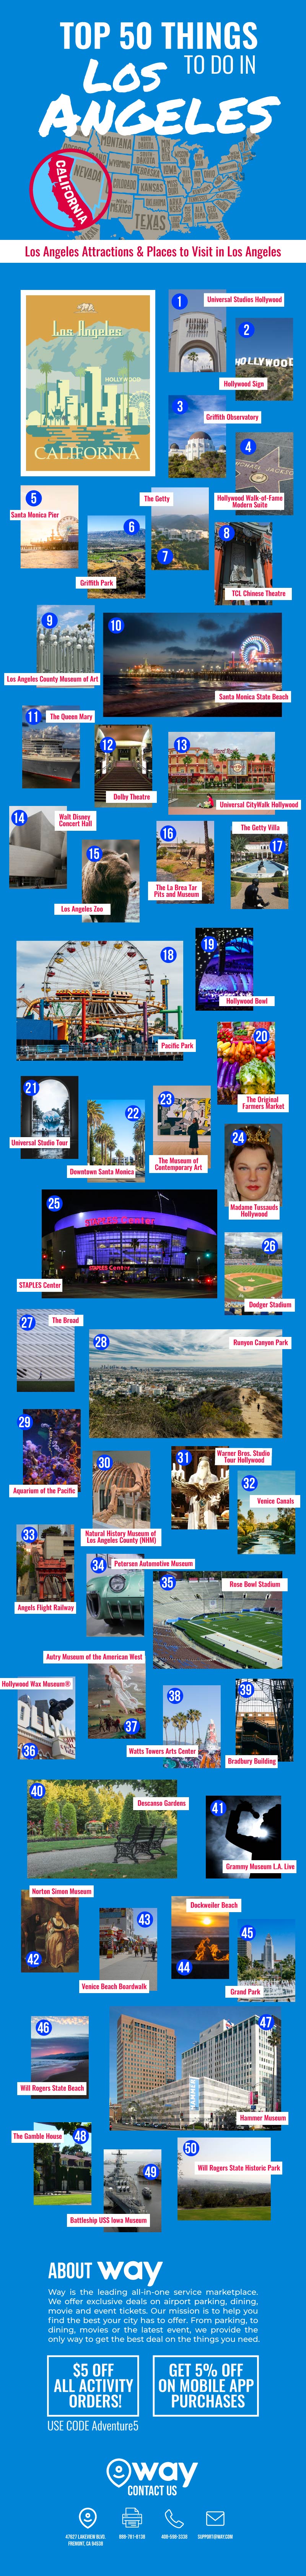 Top 50 Things to Do in Los Angeles [INFOGRAPHIC]